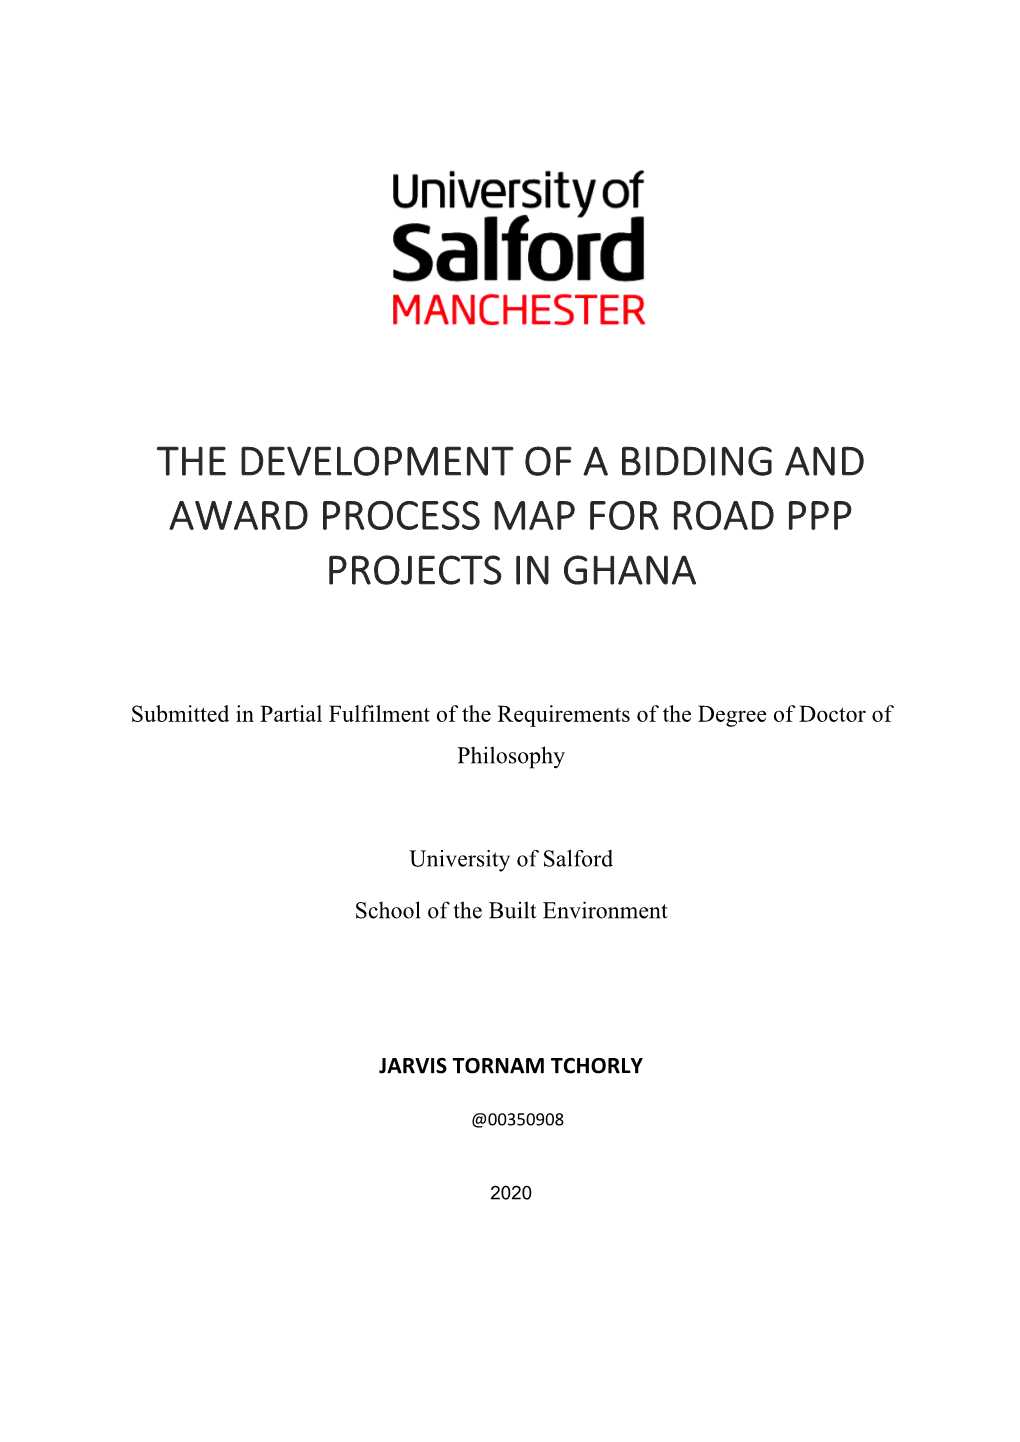 The Development of a Bidding and Award Process Map for Road Ppp Projects in Ghana